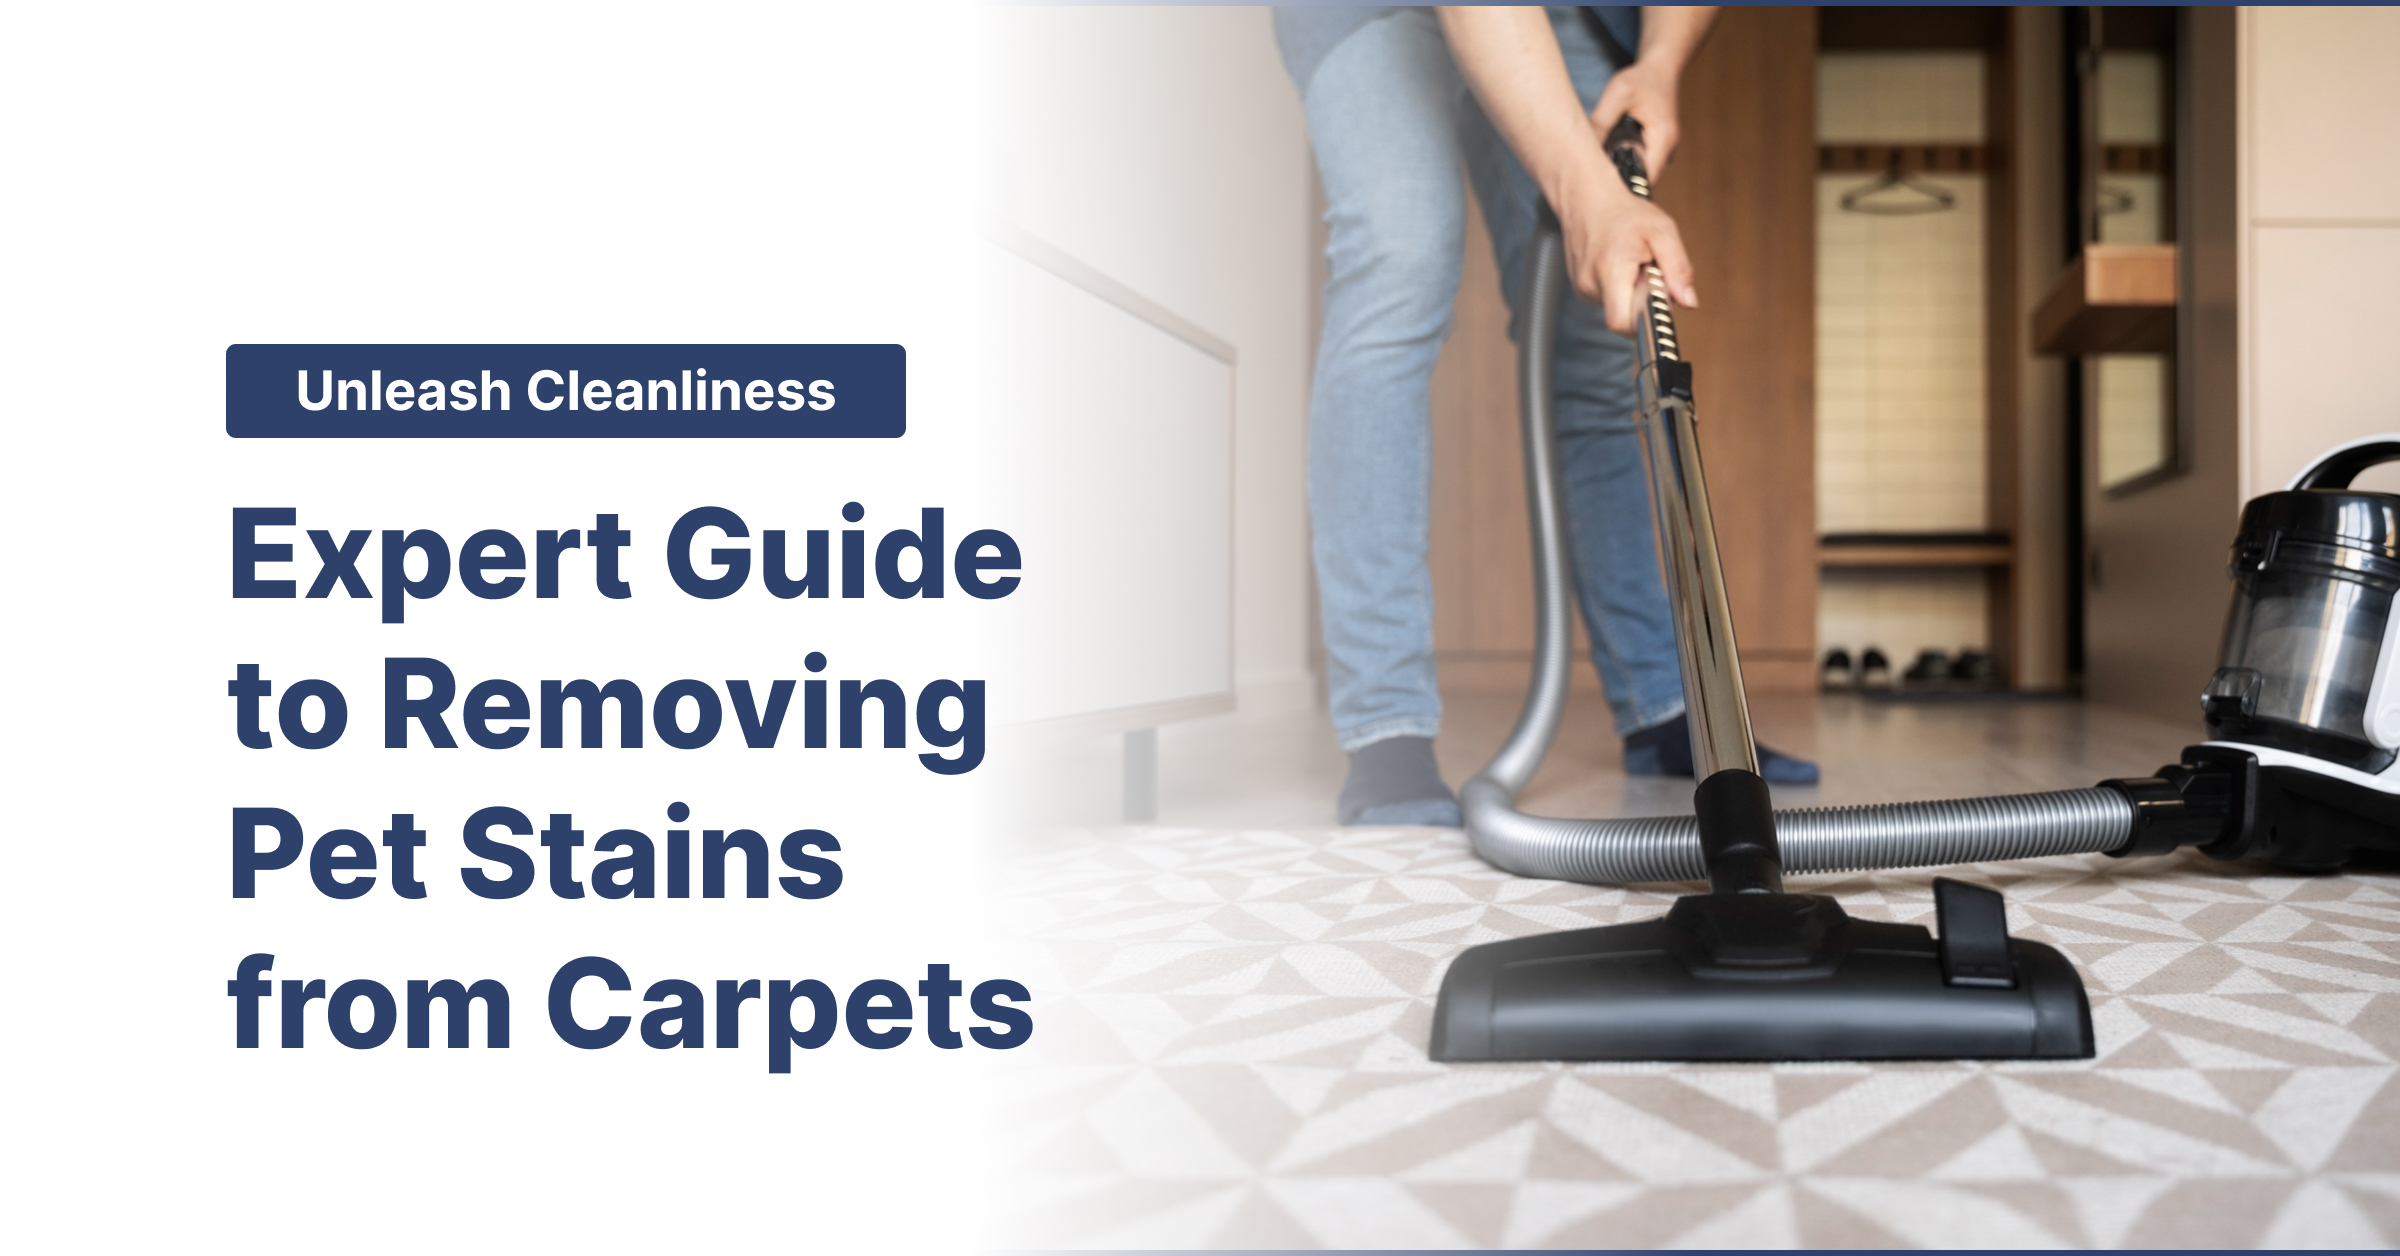 Unleash Cleanliness: Expert Guide to Removing Pet Stains from Carpets